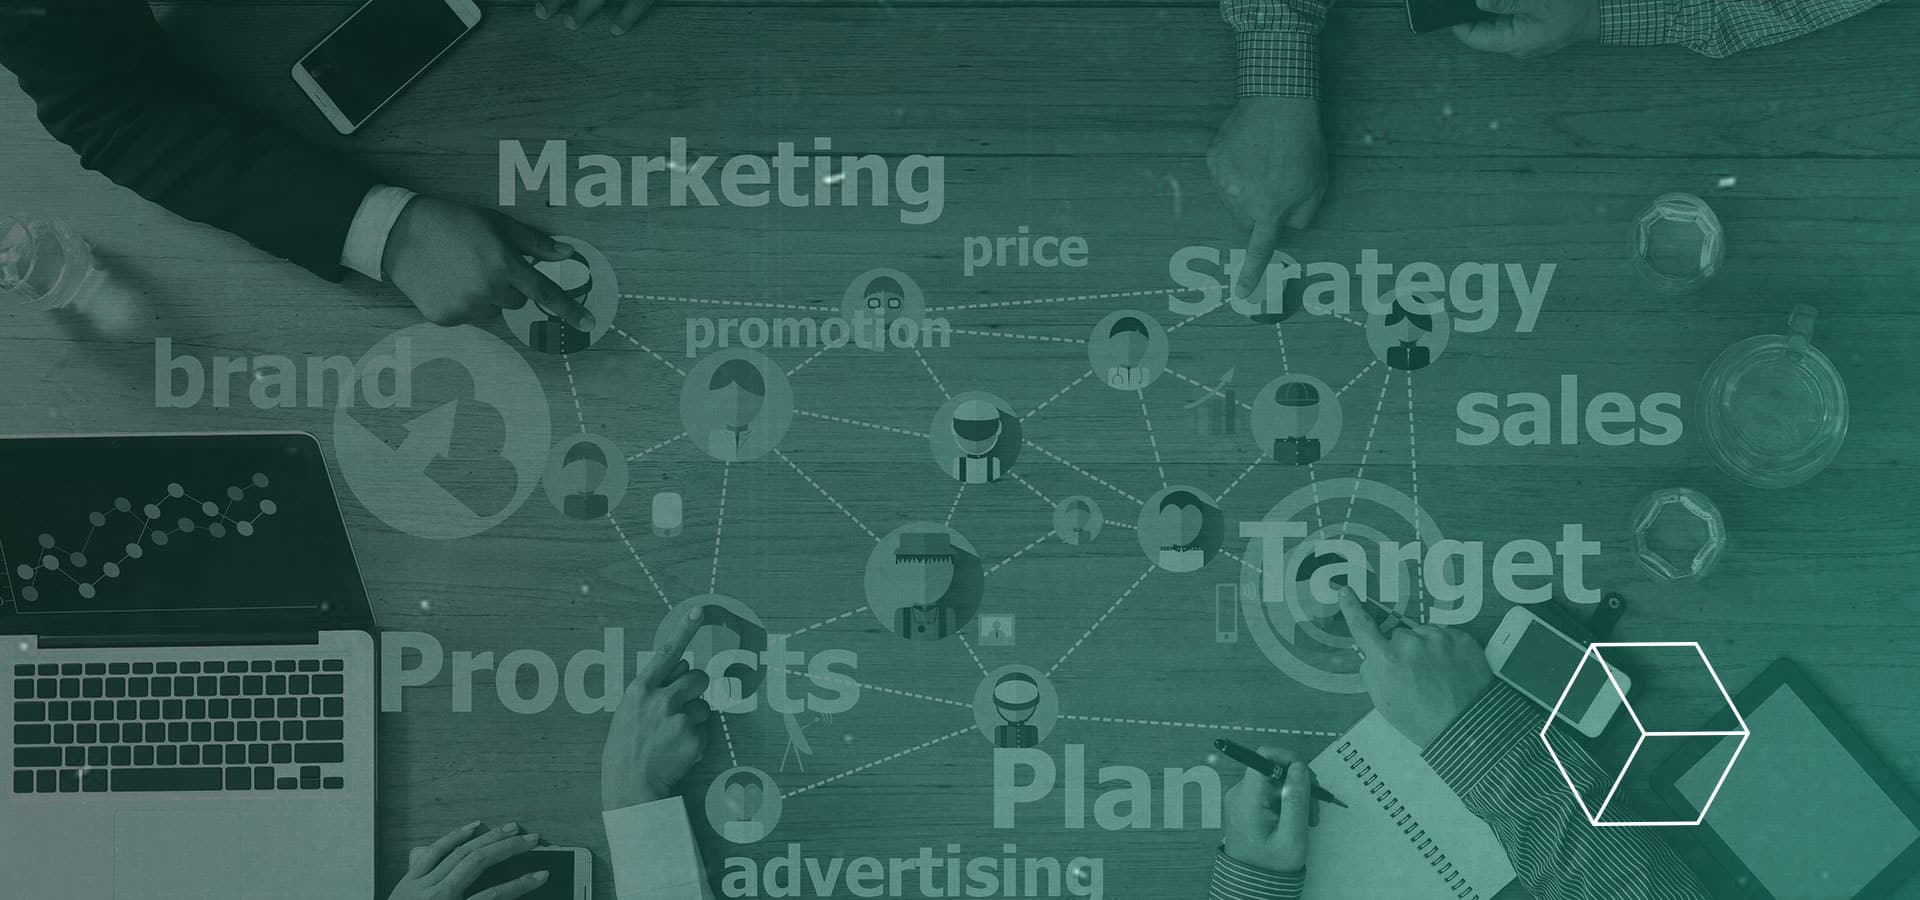 5 Best Digital Marketing Campaigns To Inspire You In 2021 - Mediatool